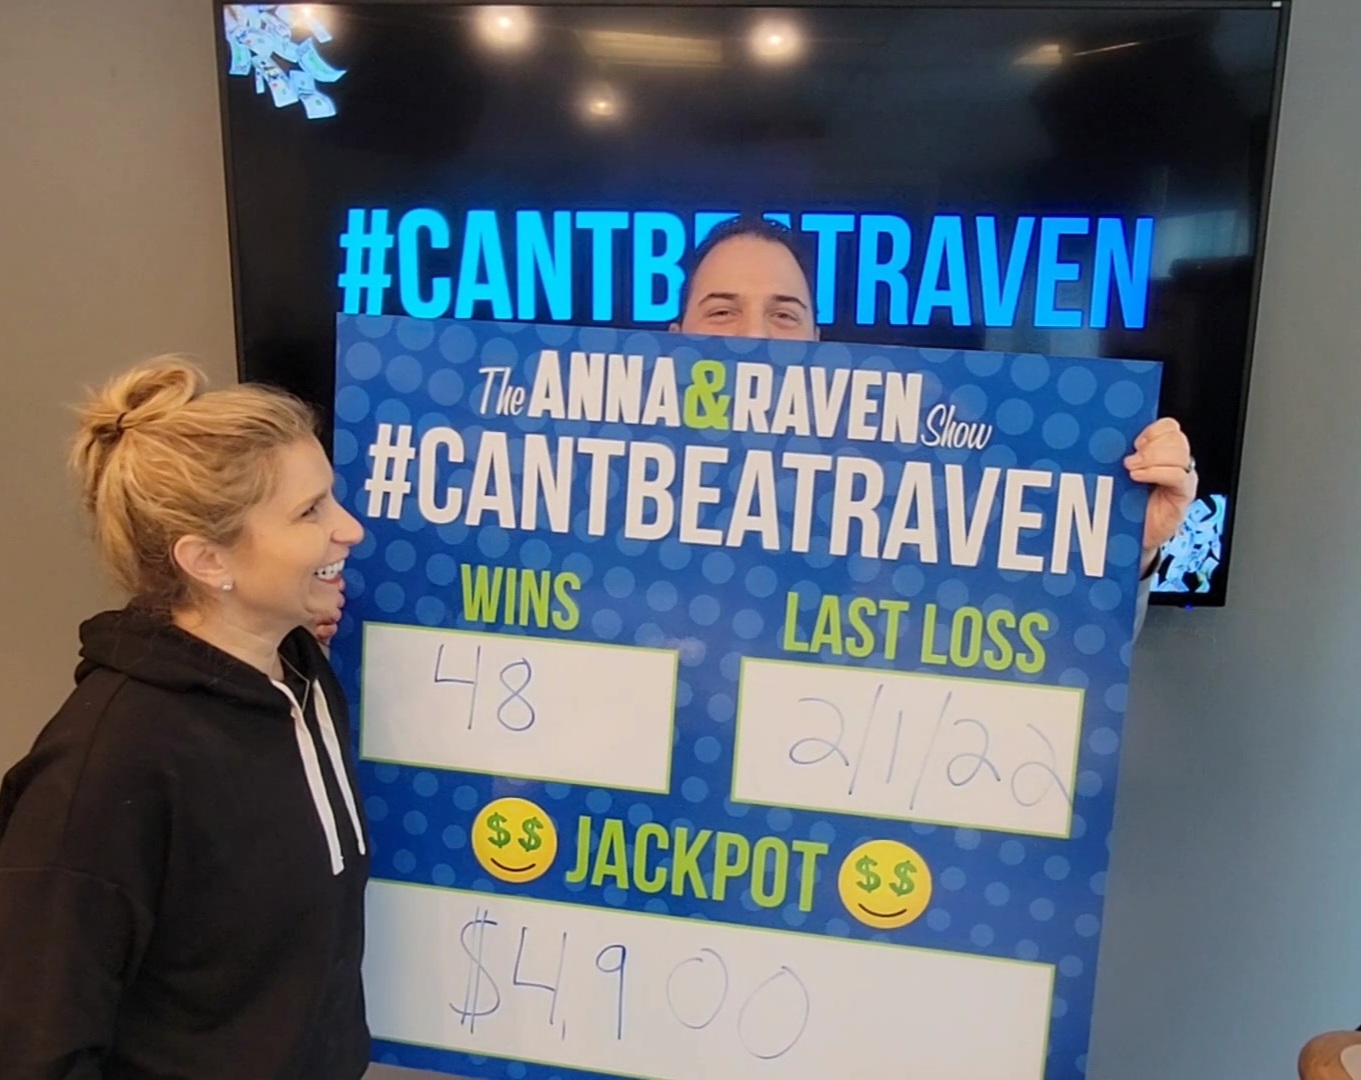 The Largest Can’t Beat Raven Jackpot Yet!